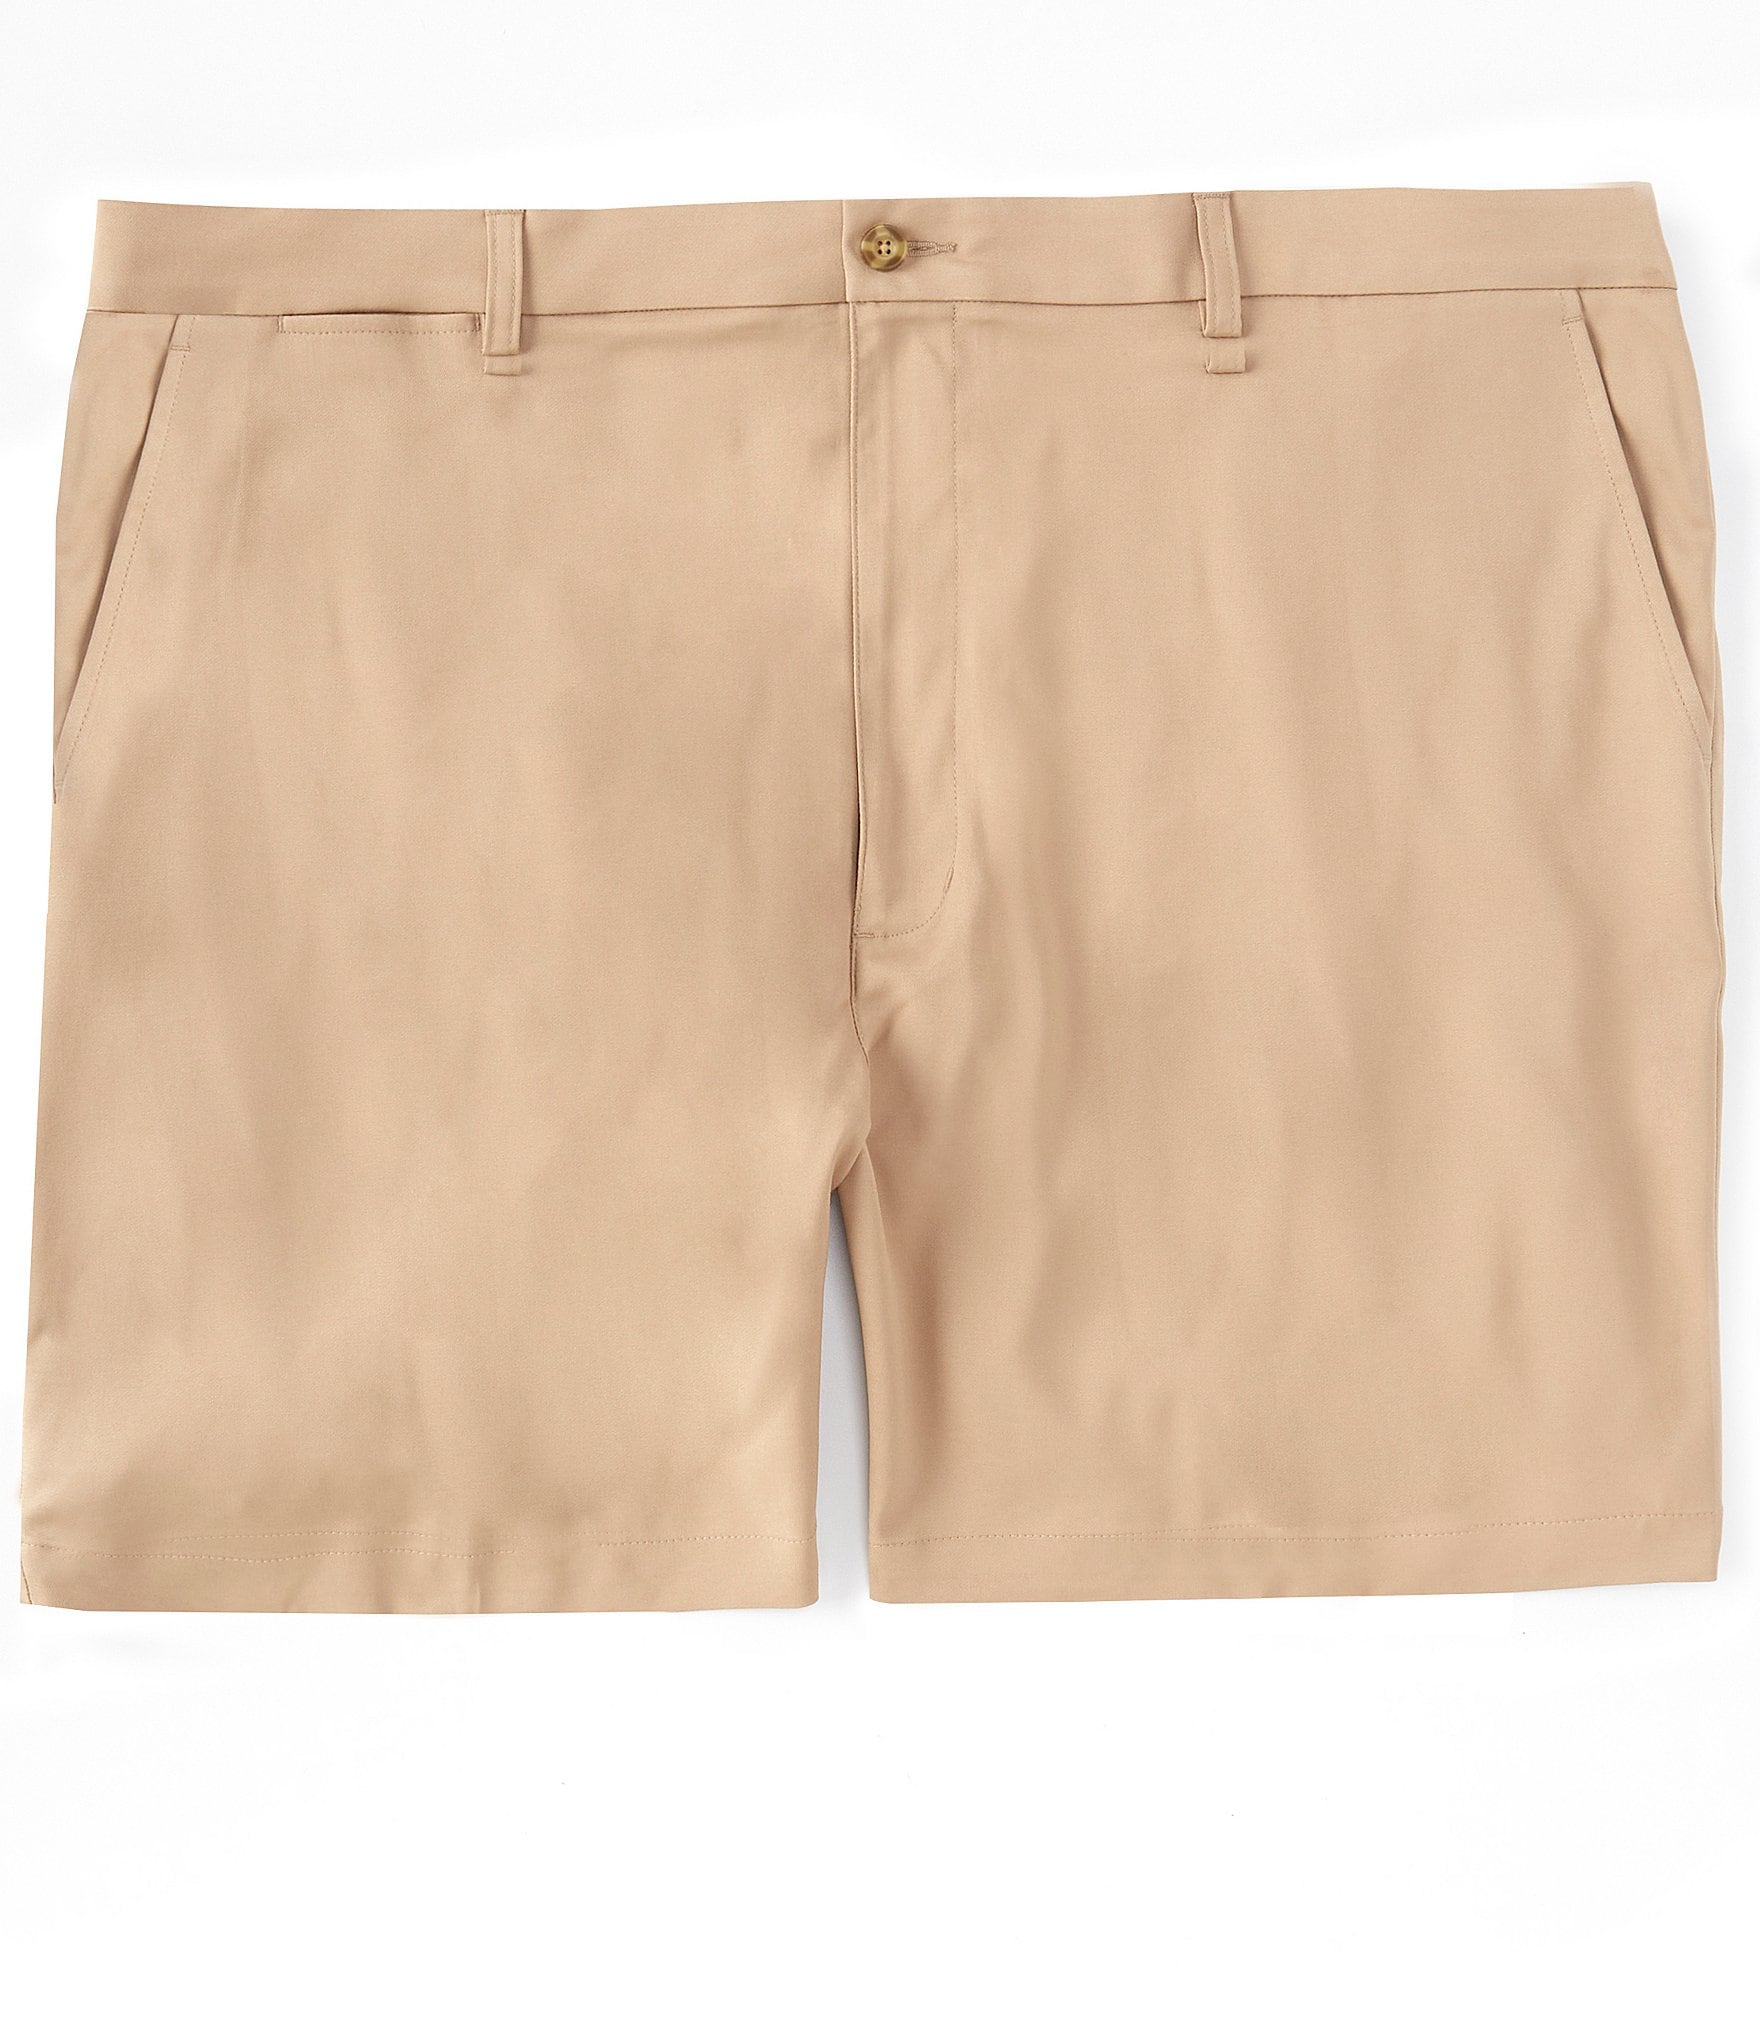 Roundtree & Yorke Big & Tall Straight Fit Flat Front 7 and 9 Inseam Shorts